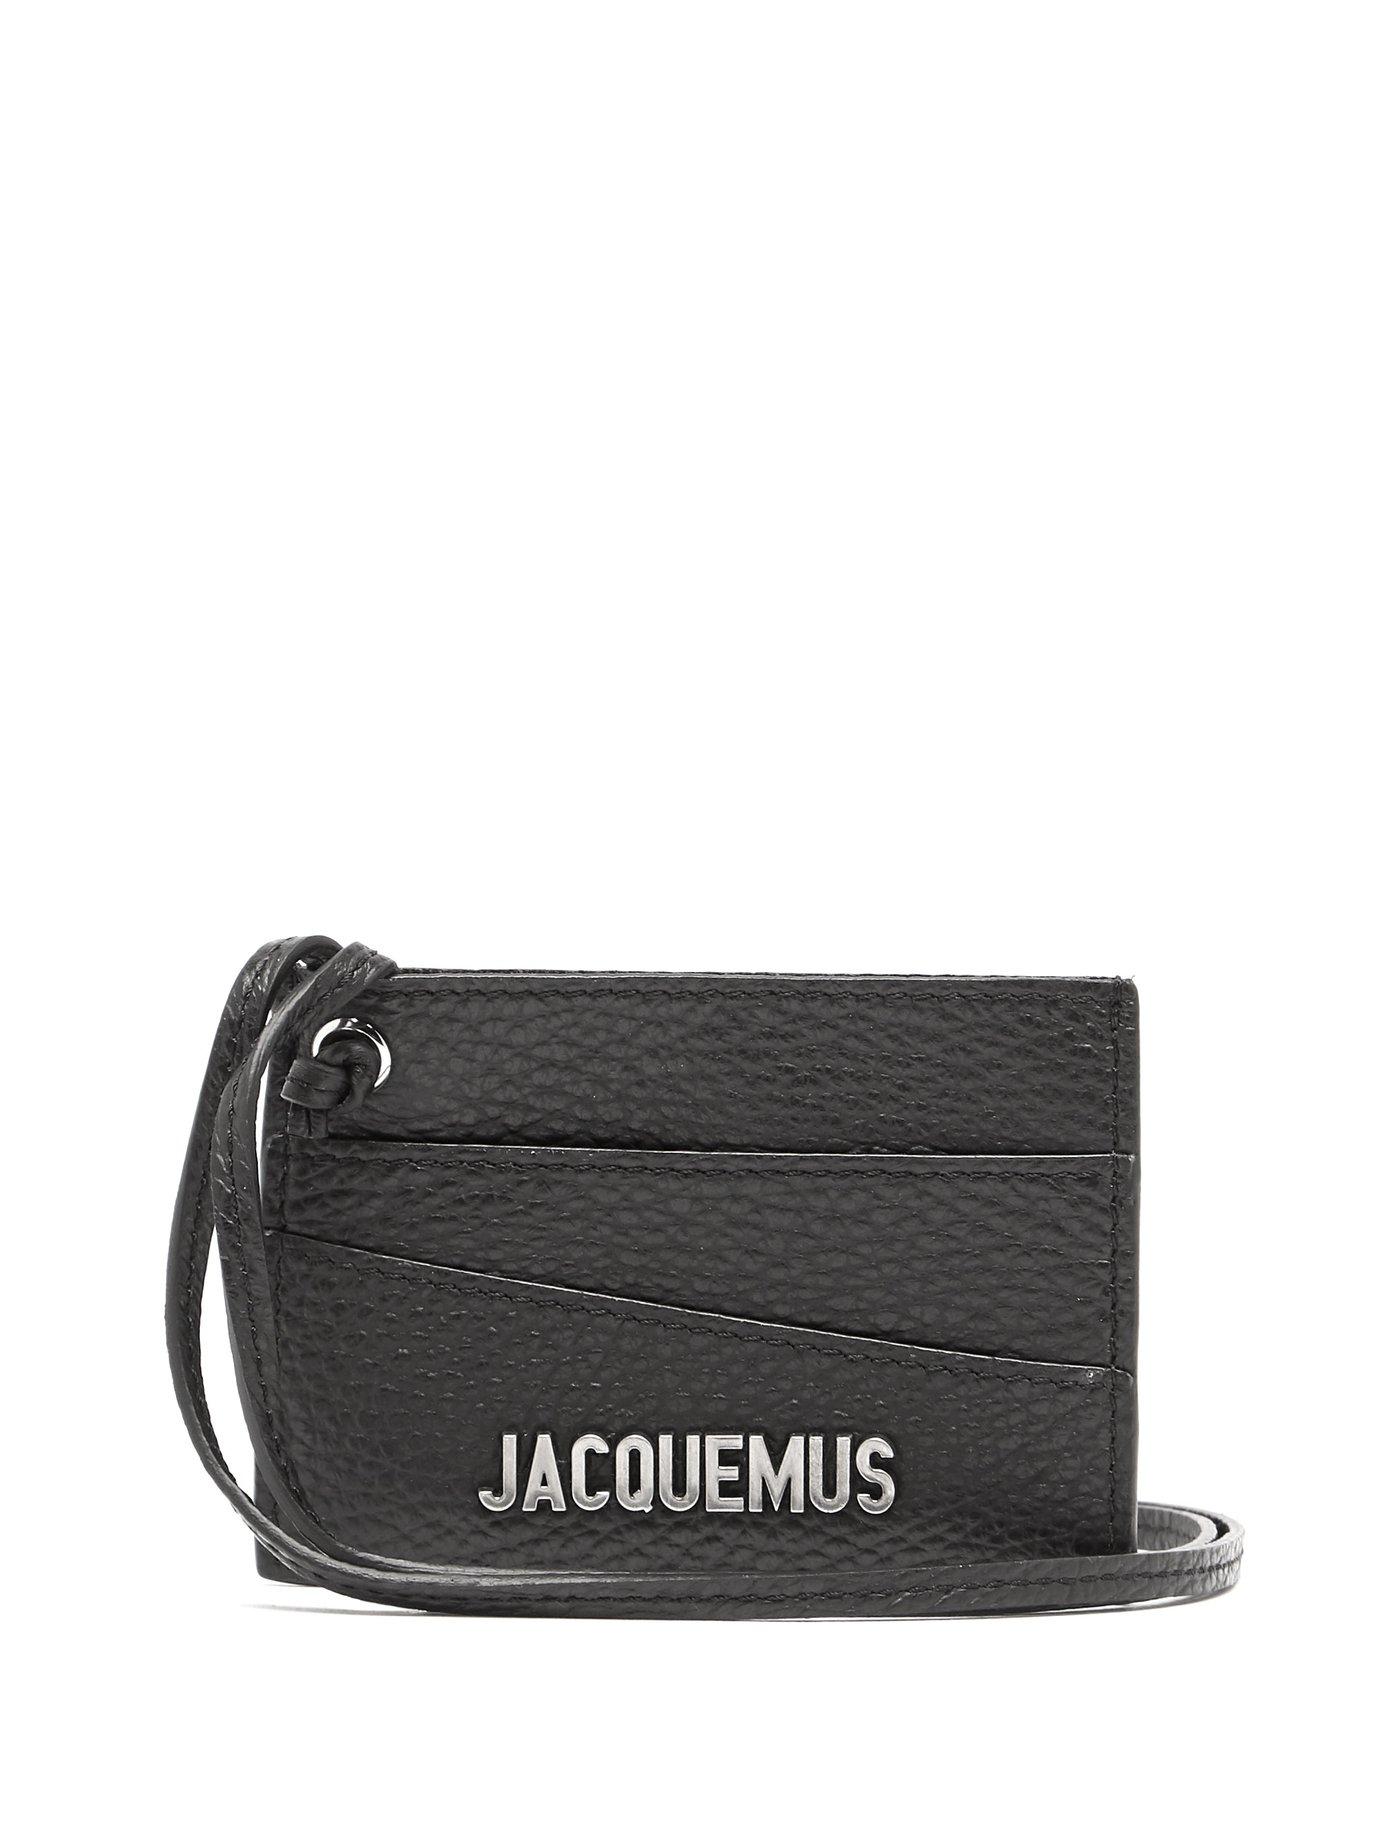 Jacquemus Leather le Porte Rectangle Wallet in Black for Men Mens Accessories Wallets and cardholders 